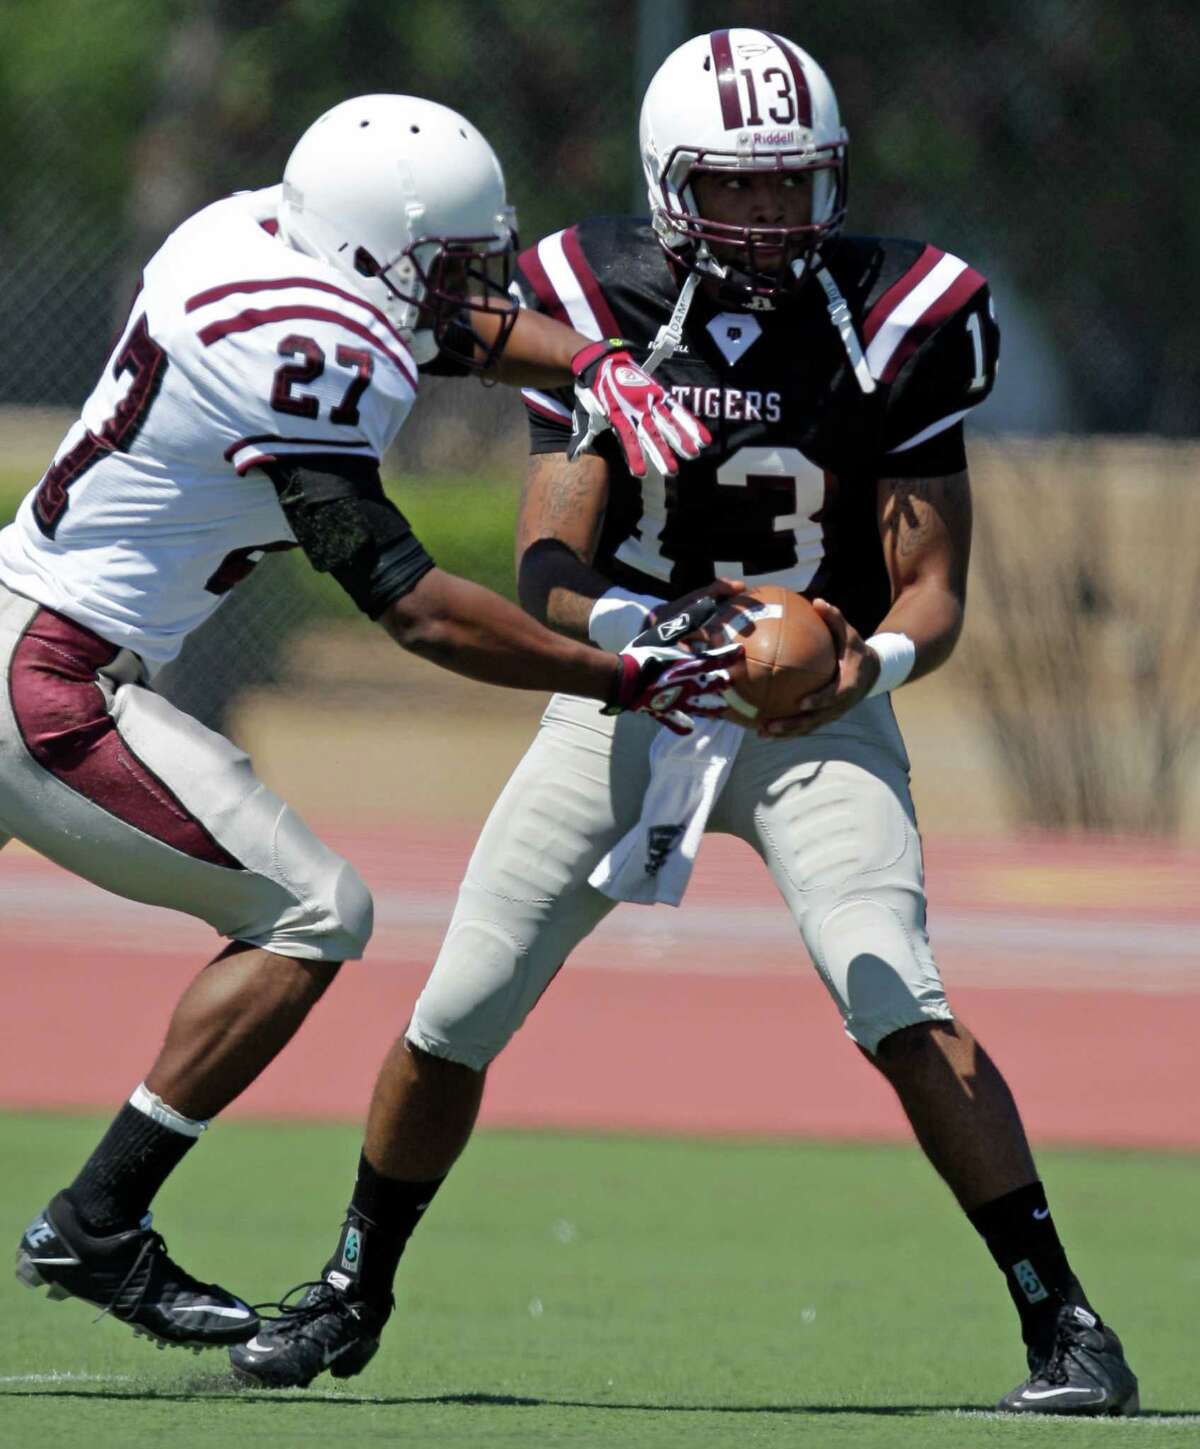 Texas Southern University Tiger's Tony Peoples, left, takes a handoff from QB Riko Small during the spring football game at TSU's Alexander Durley Stadium Saturday, April 21, 2012, in Houston.